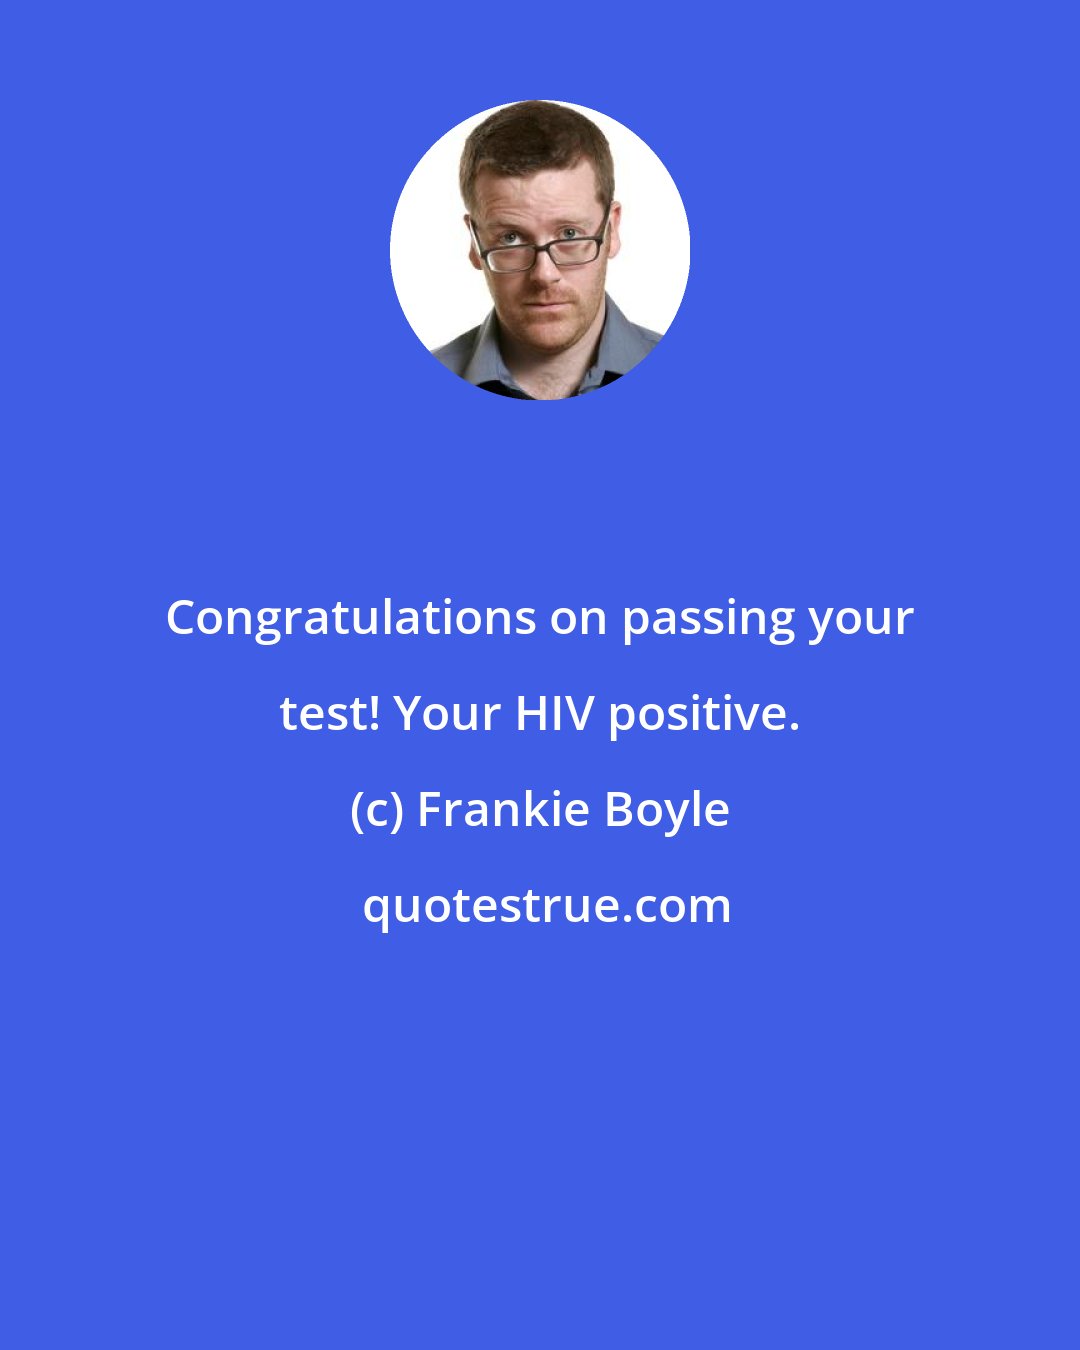 Frankie Boyle: Congratulations on passing your test! Your HIV positive.